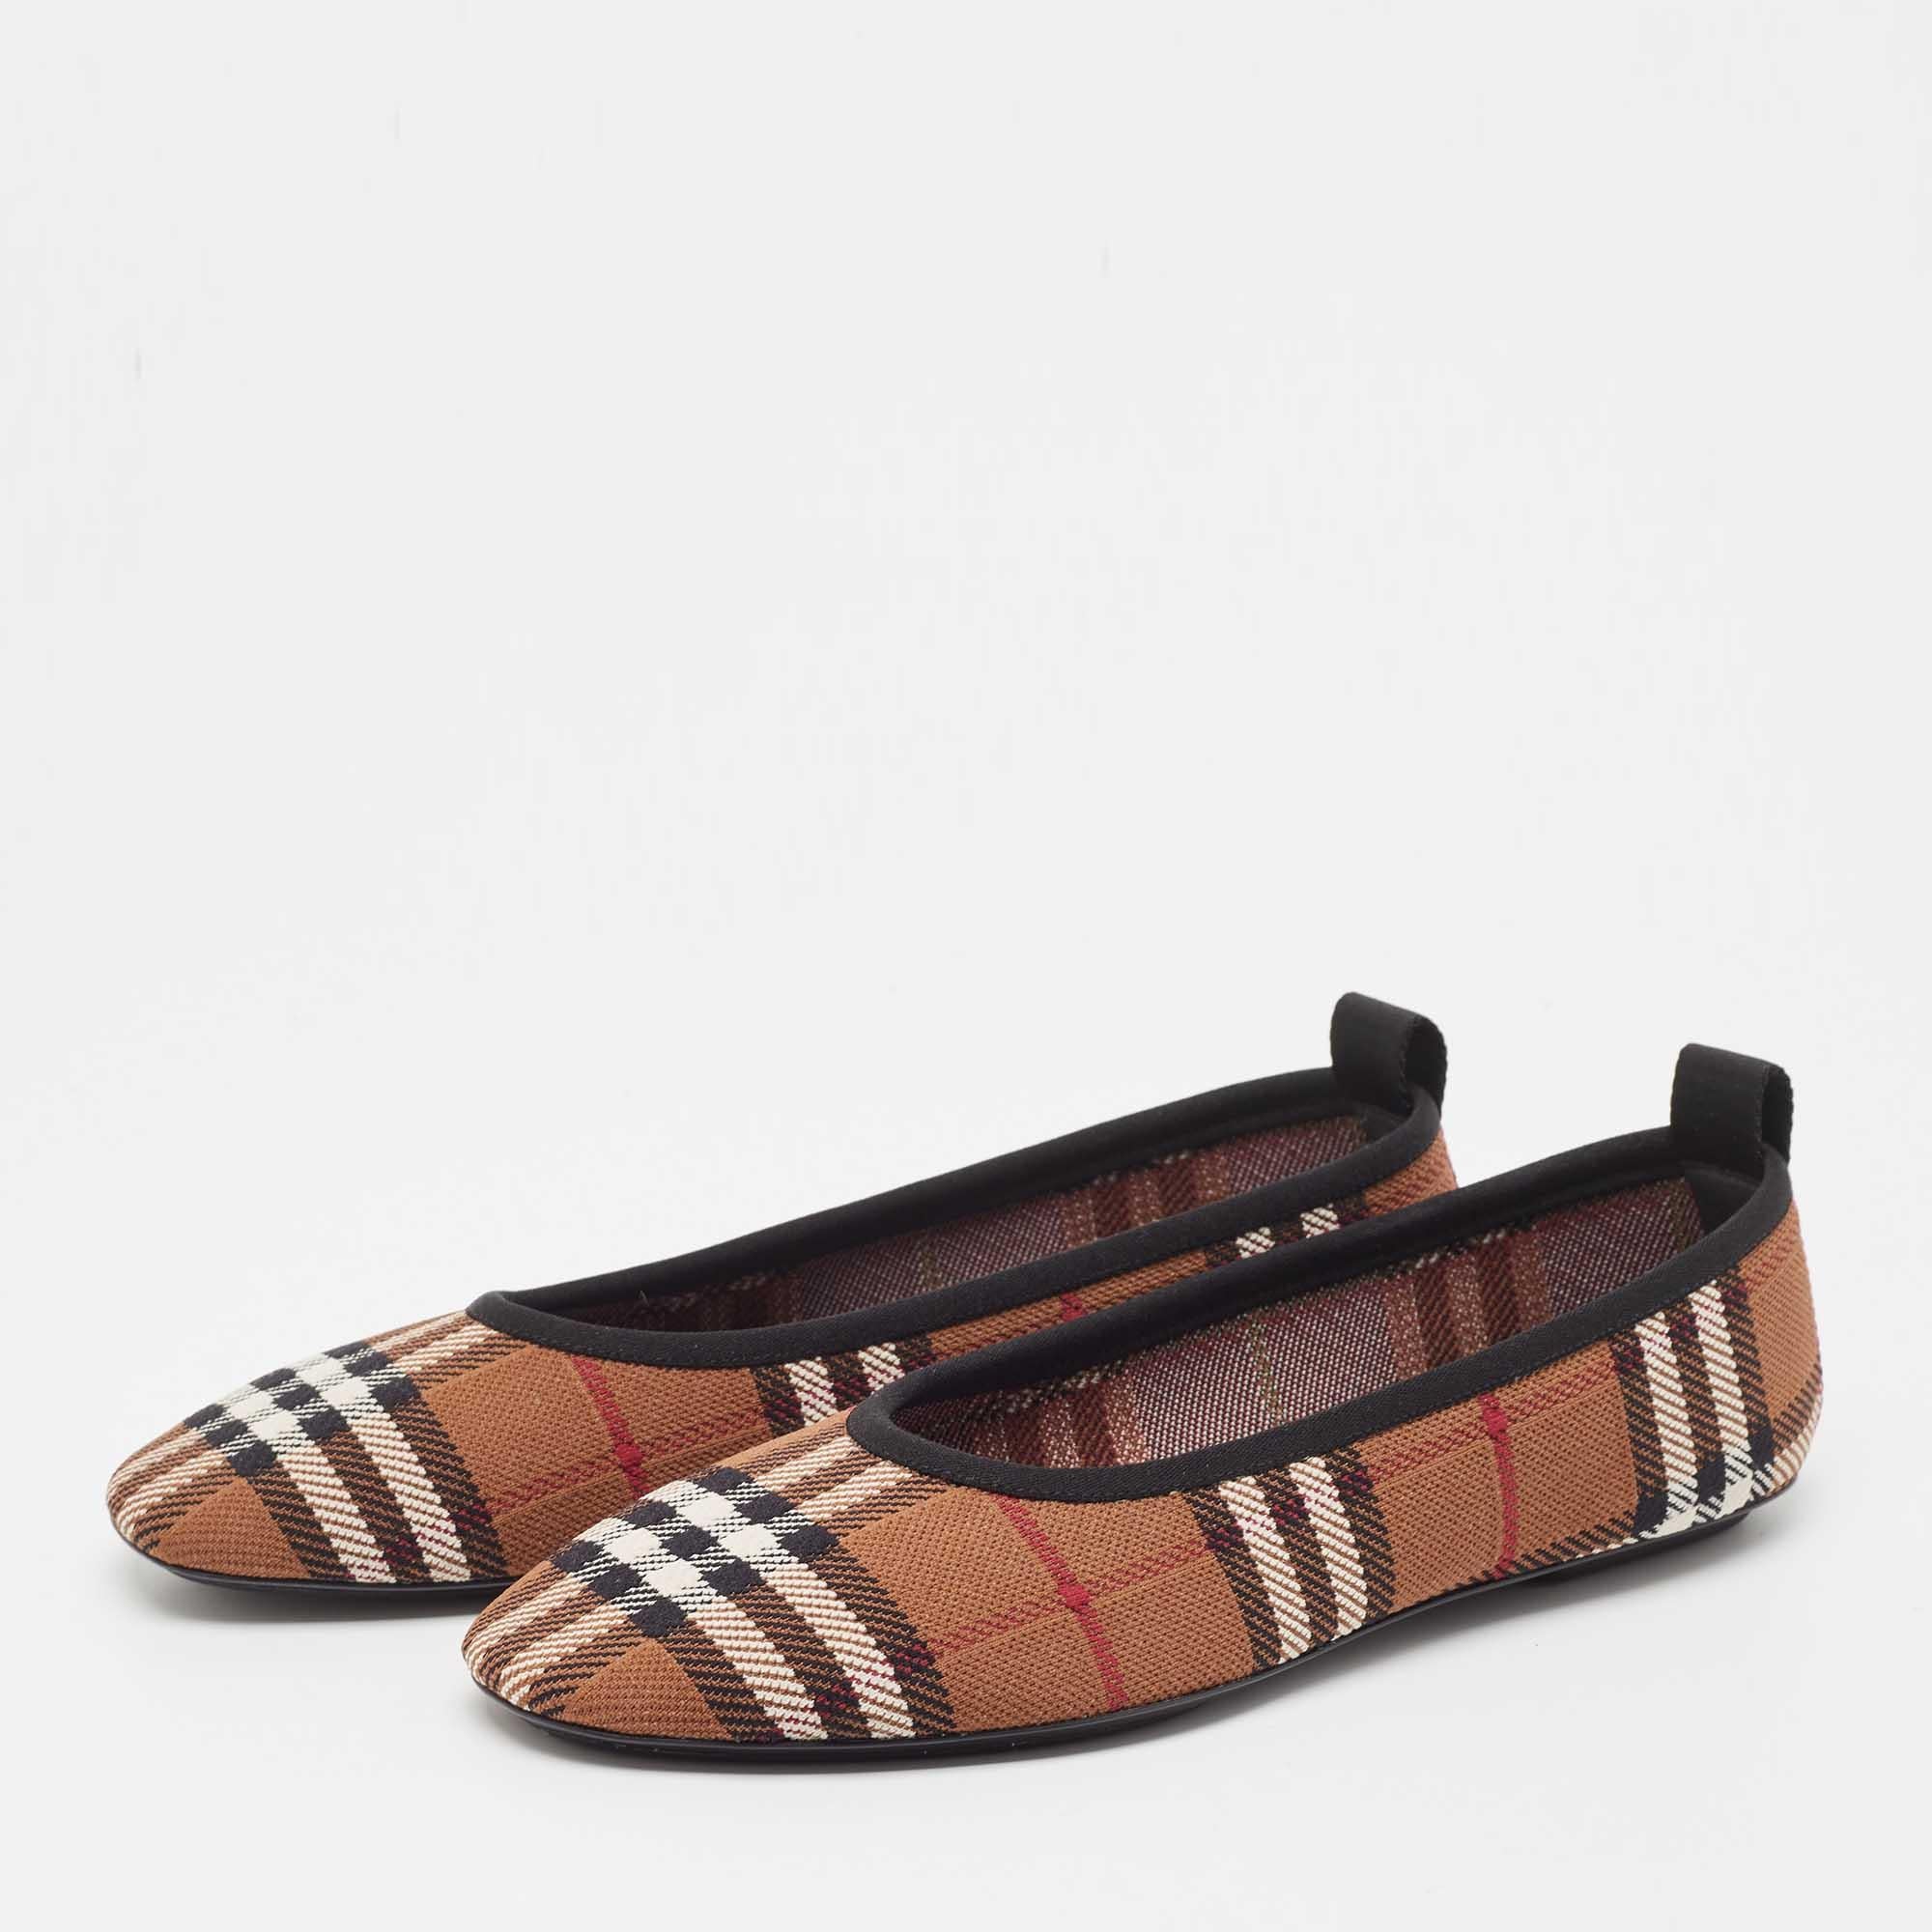 Complete your look by adding these Burberry ballet flats to your lovely wardrobe. They are crafted skilfully to grant the perfect fit and style.

Includes: Original Dustbag, Original Box